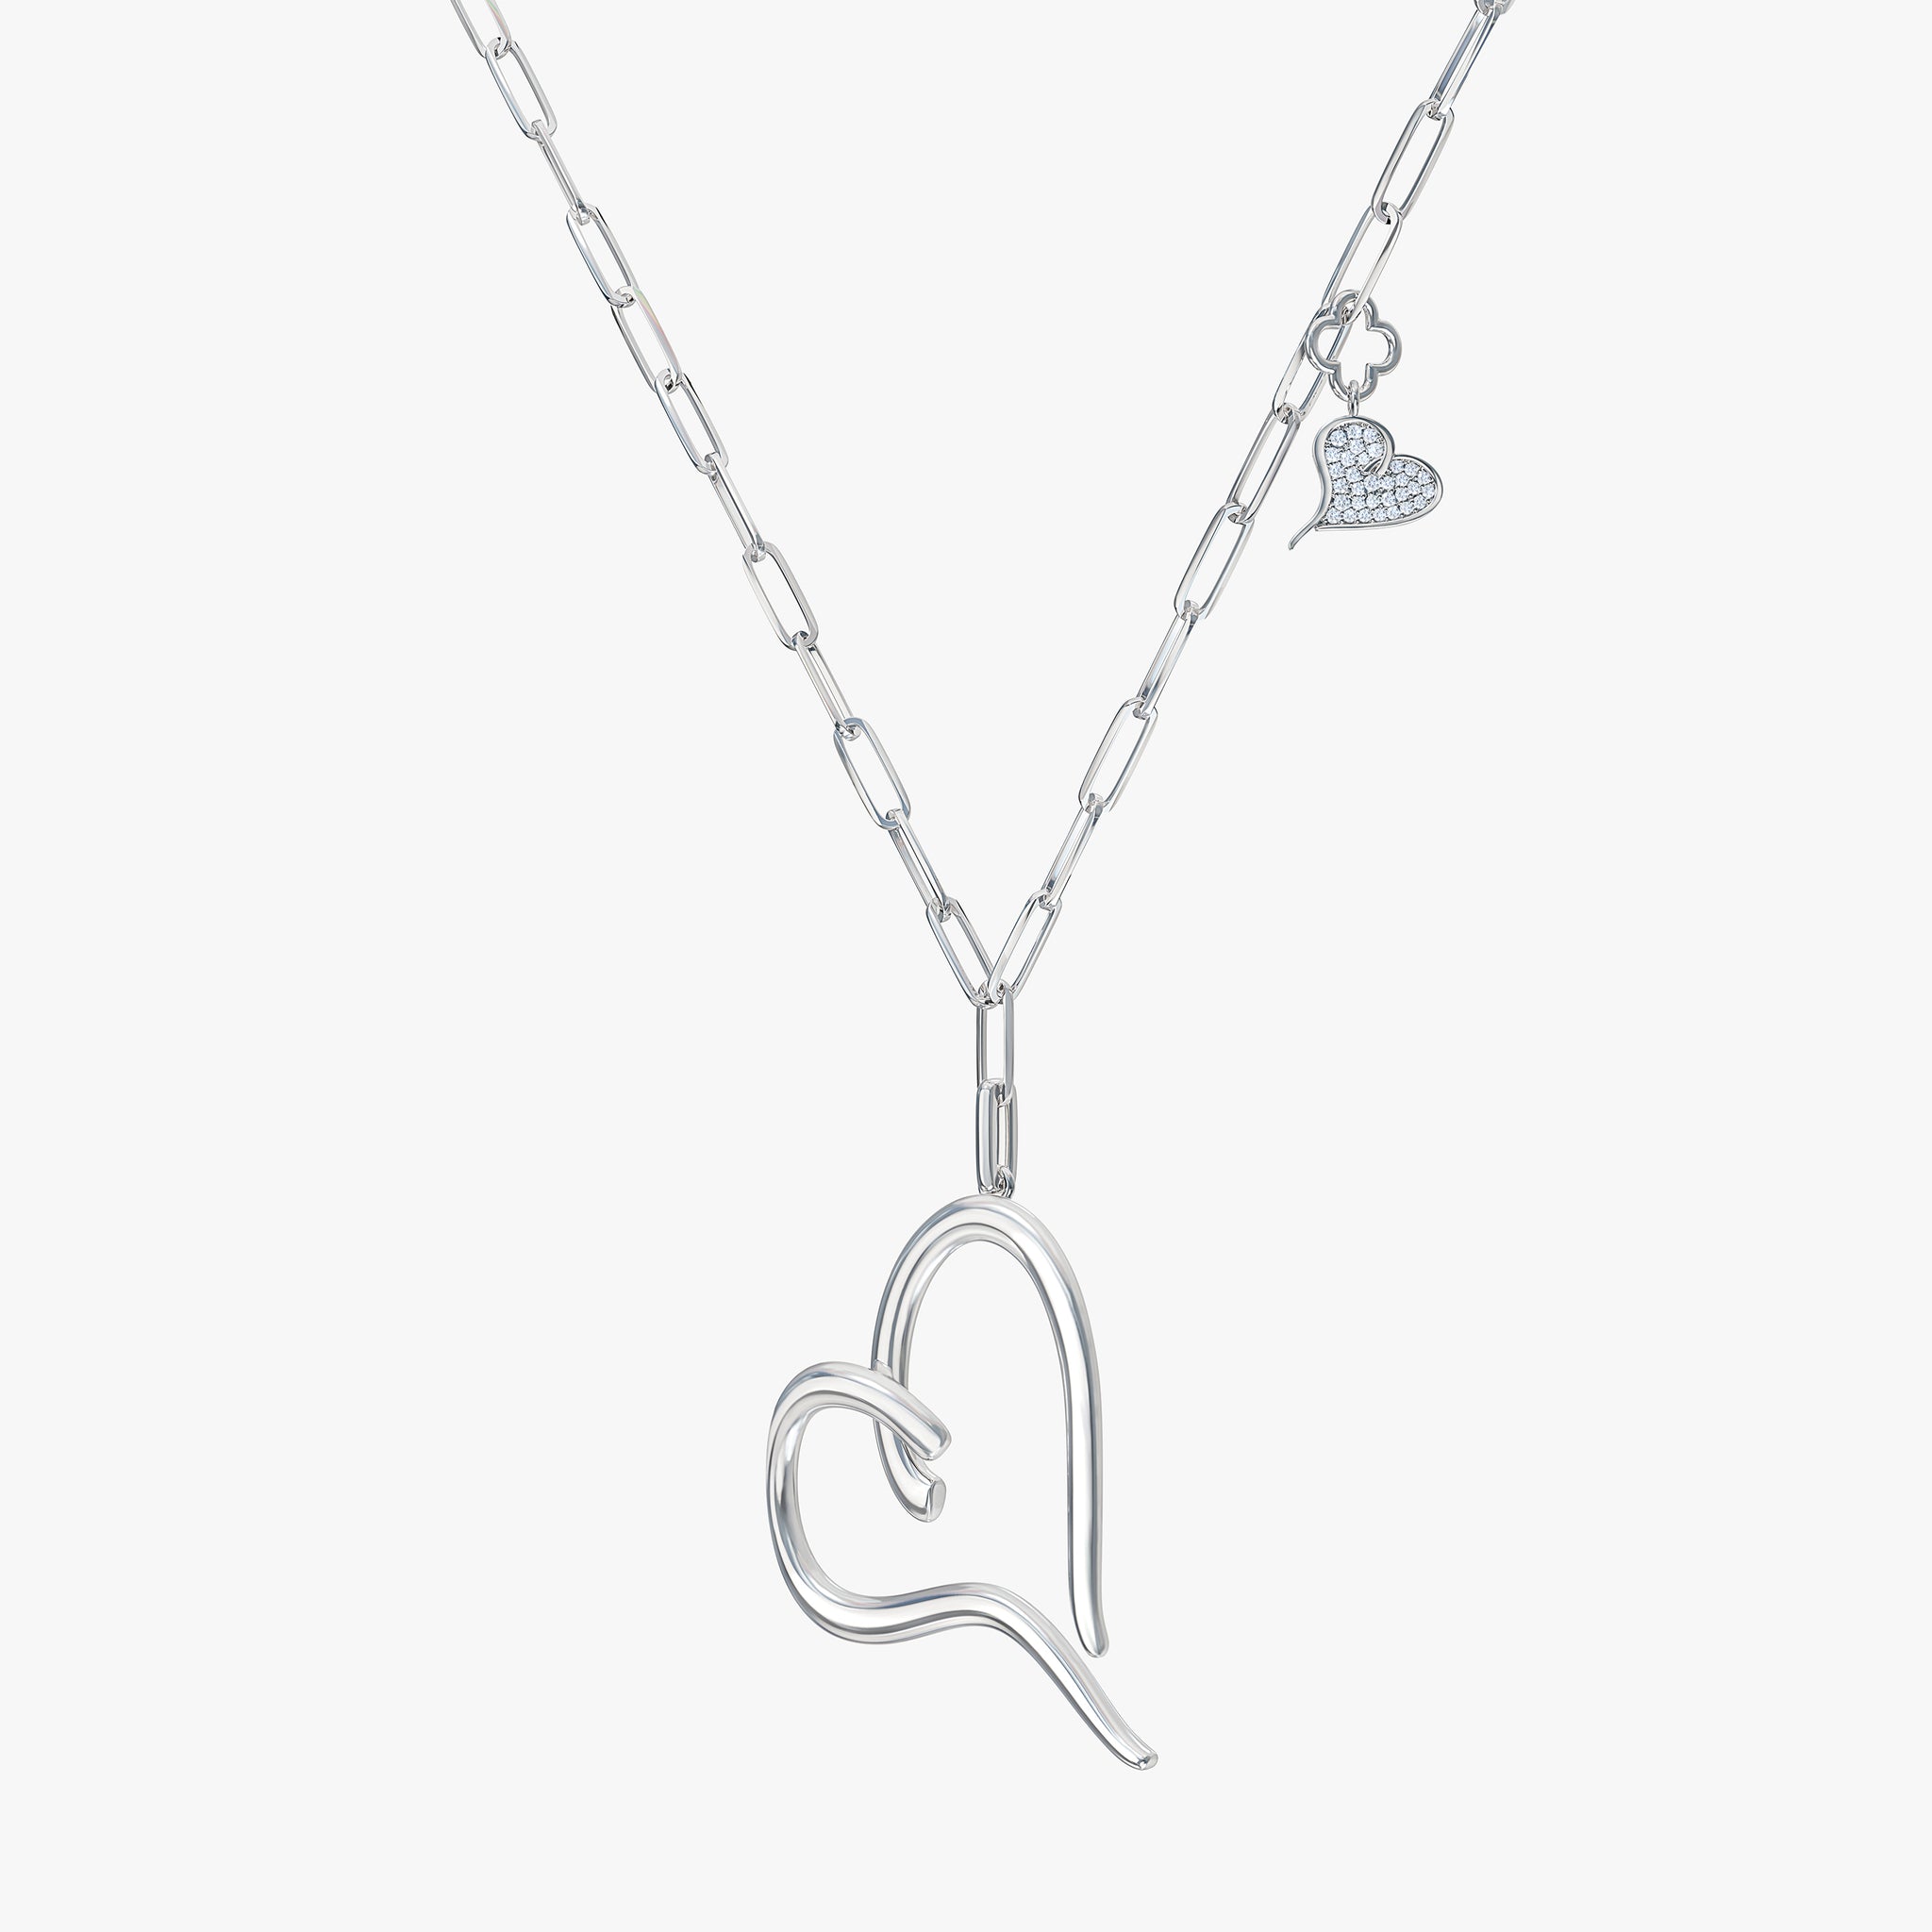 J'EVAR Sterling Silver Heart Charm ALTR Lab Grown Diamond Necklace Perspective View